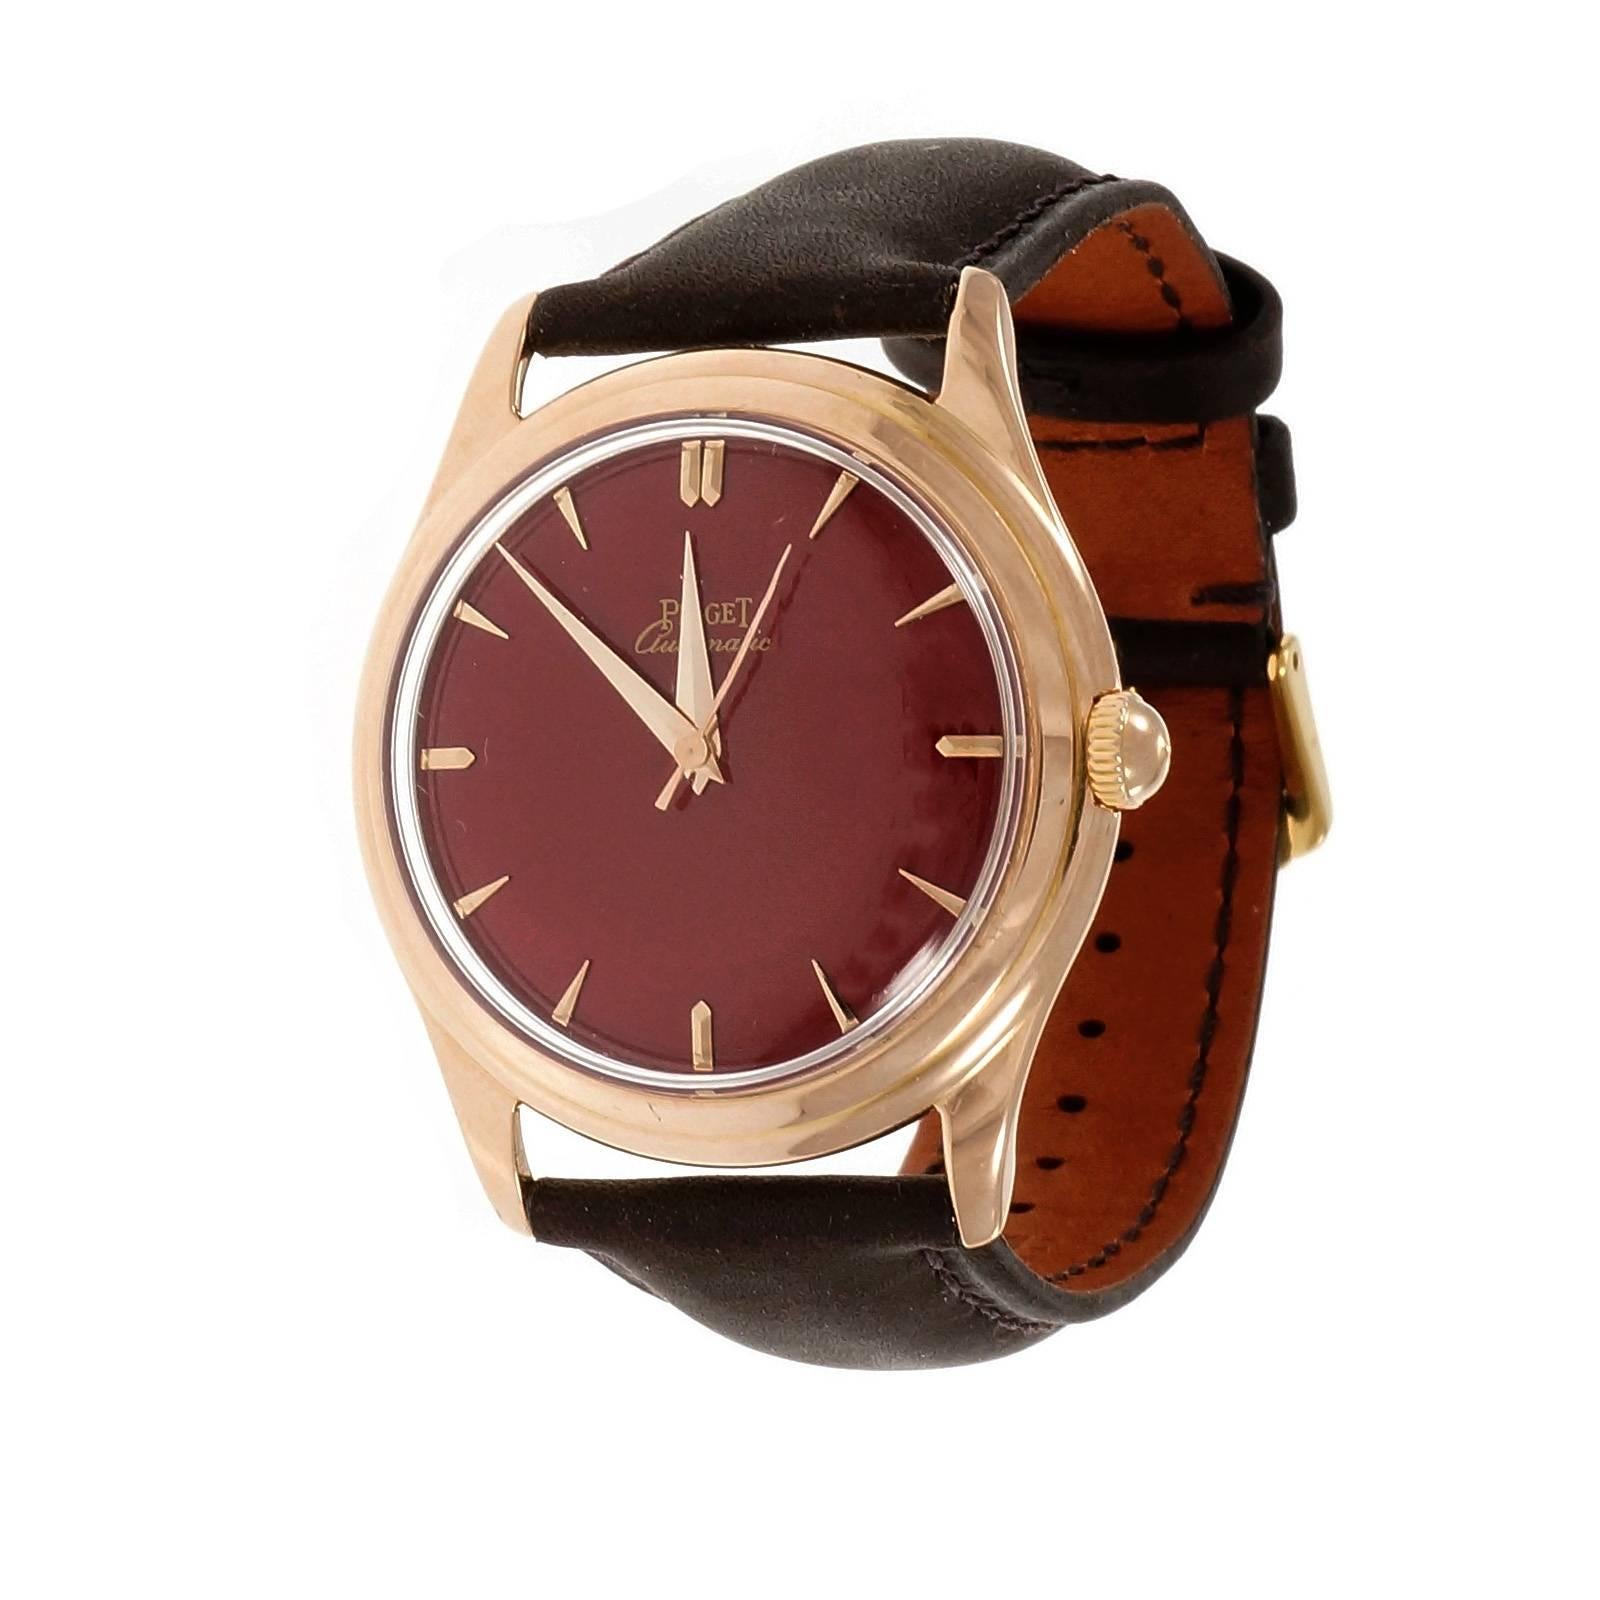 Piaget 18k Rose Gold Automatic Custom Dial Wristwatch. The dial is a custom refinished, shiny red multi-layer finish. 17 jewel. Dial is a custom refinished with shiny red multi-layer finish. A 1960's timepiece that combines classic elegance with